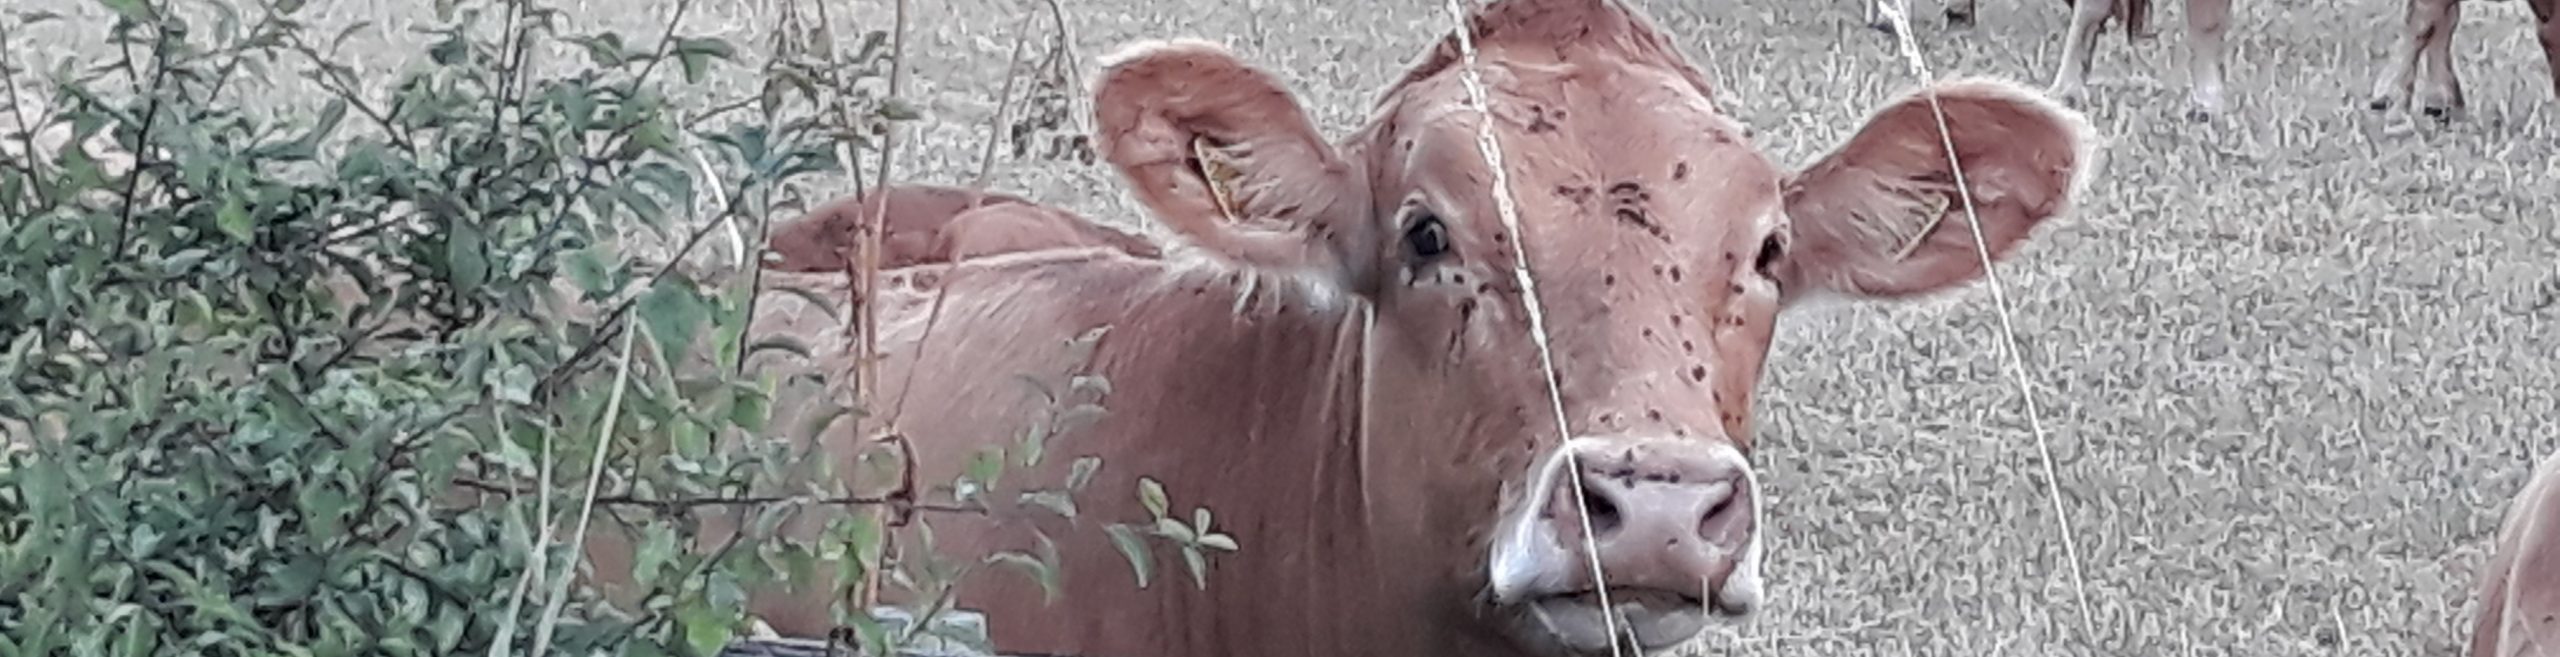 South Devon cow looking to camera